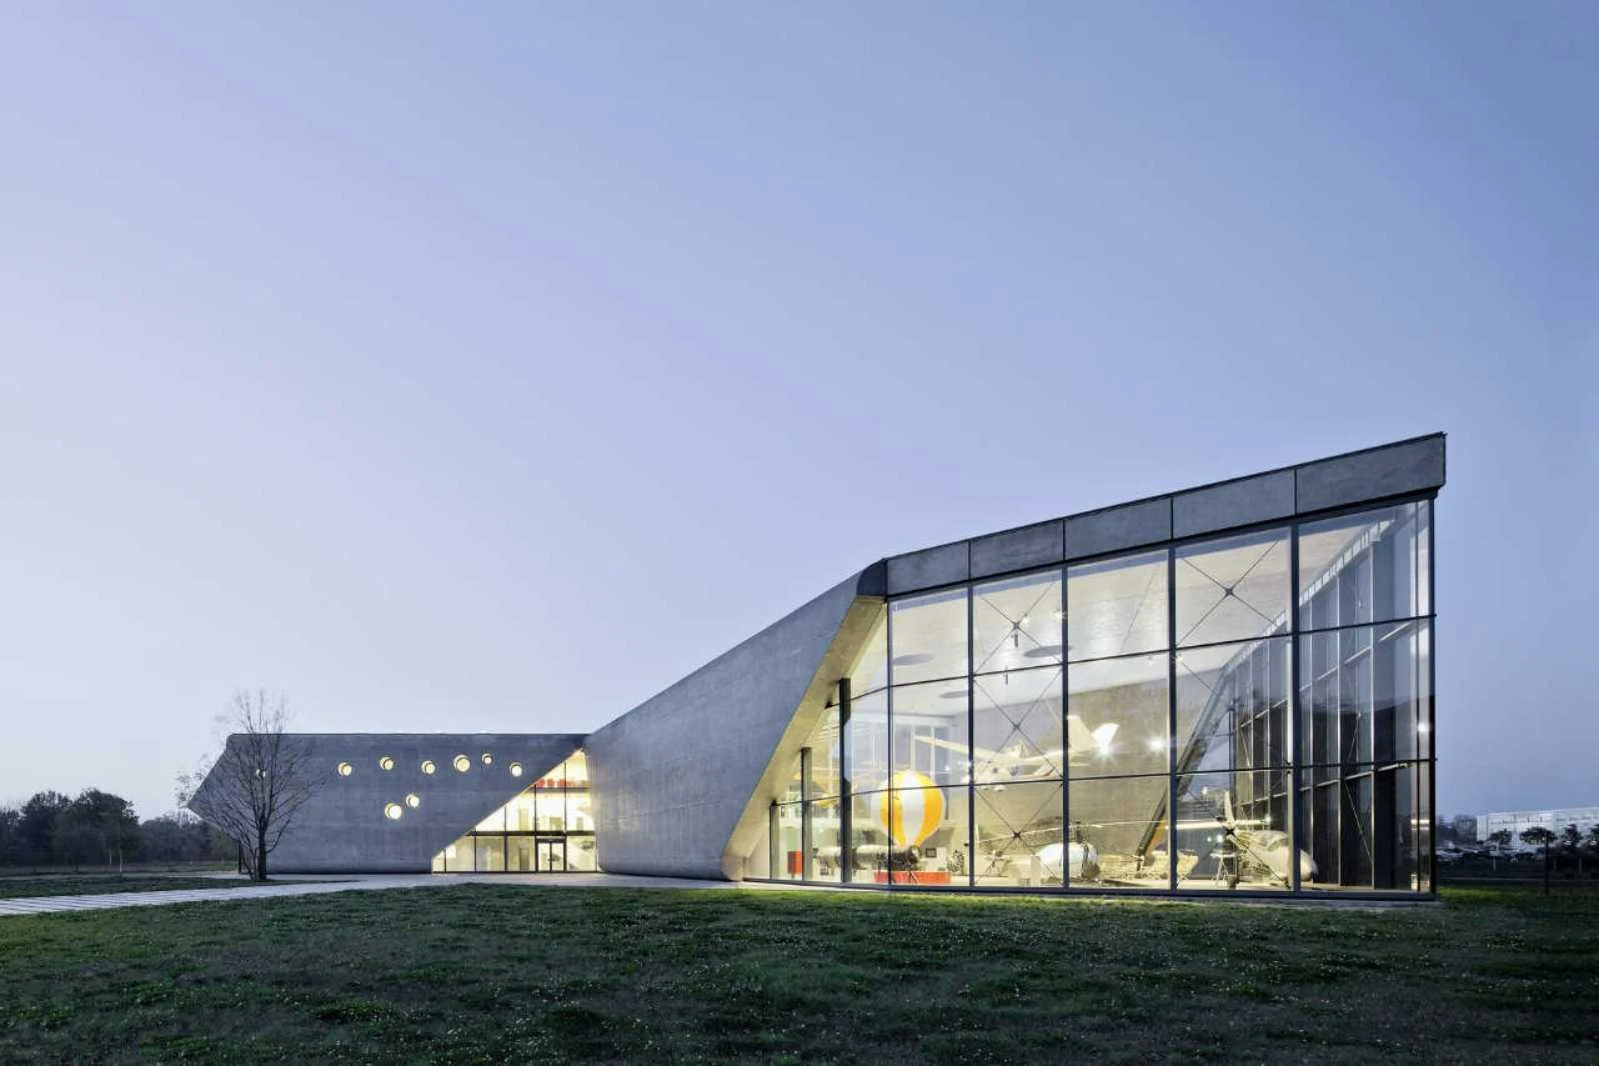 Poland: MUSEUM of AVIATION AND AVIATION EXHIBITION PARK by PYSALL ARCHITEKTEN